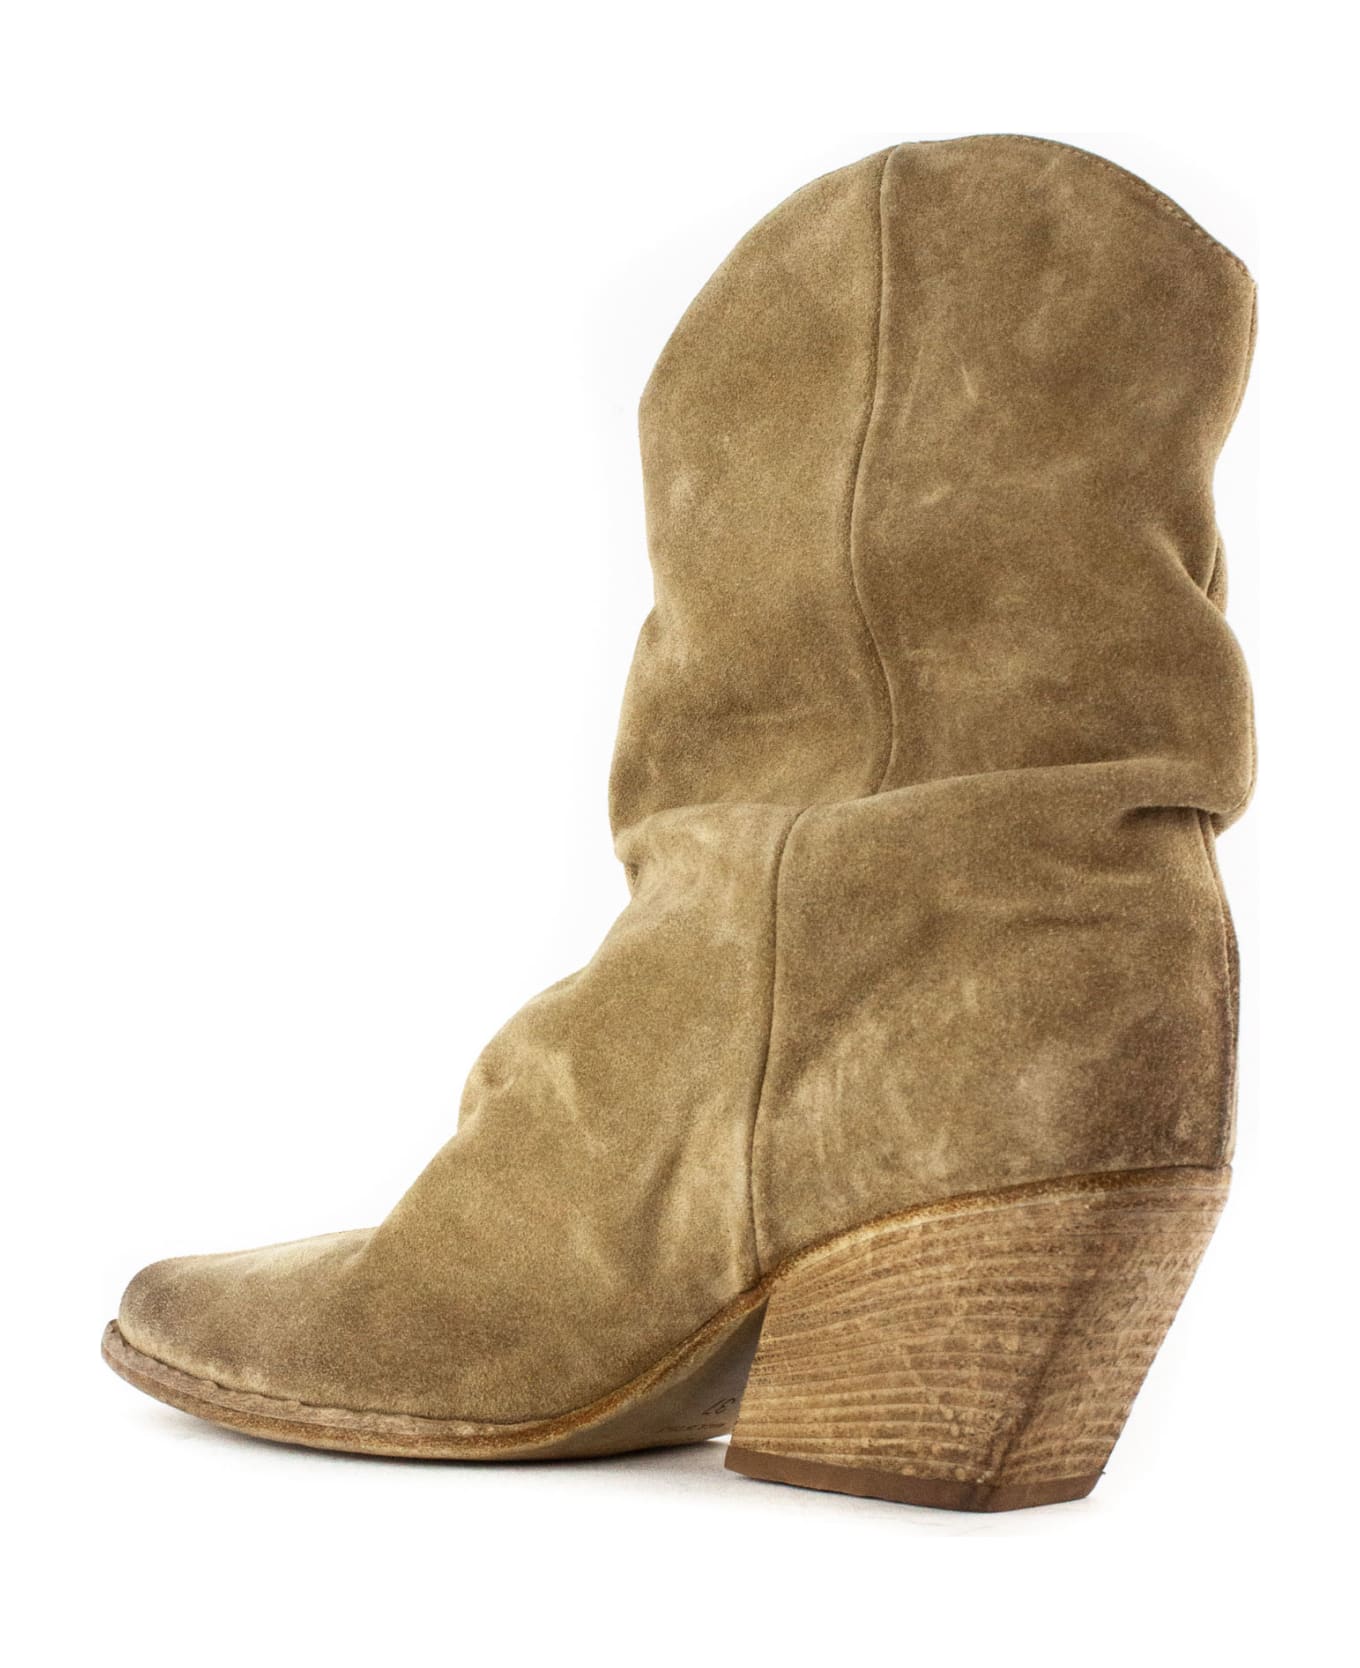 Elena Iachi Brown Suede Texan Ankle Boots - Brown